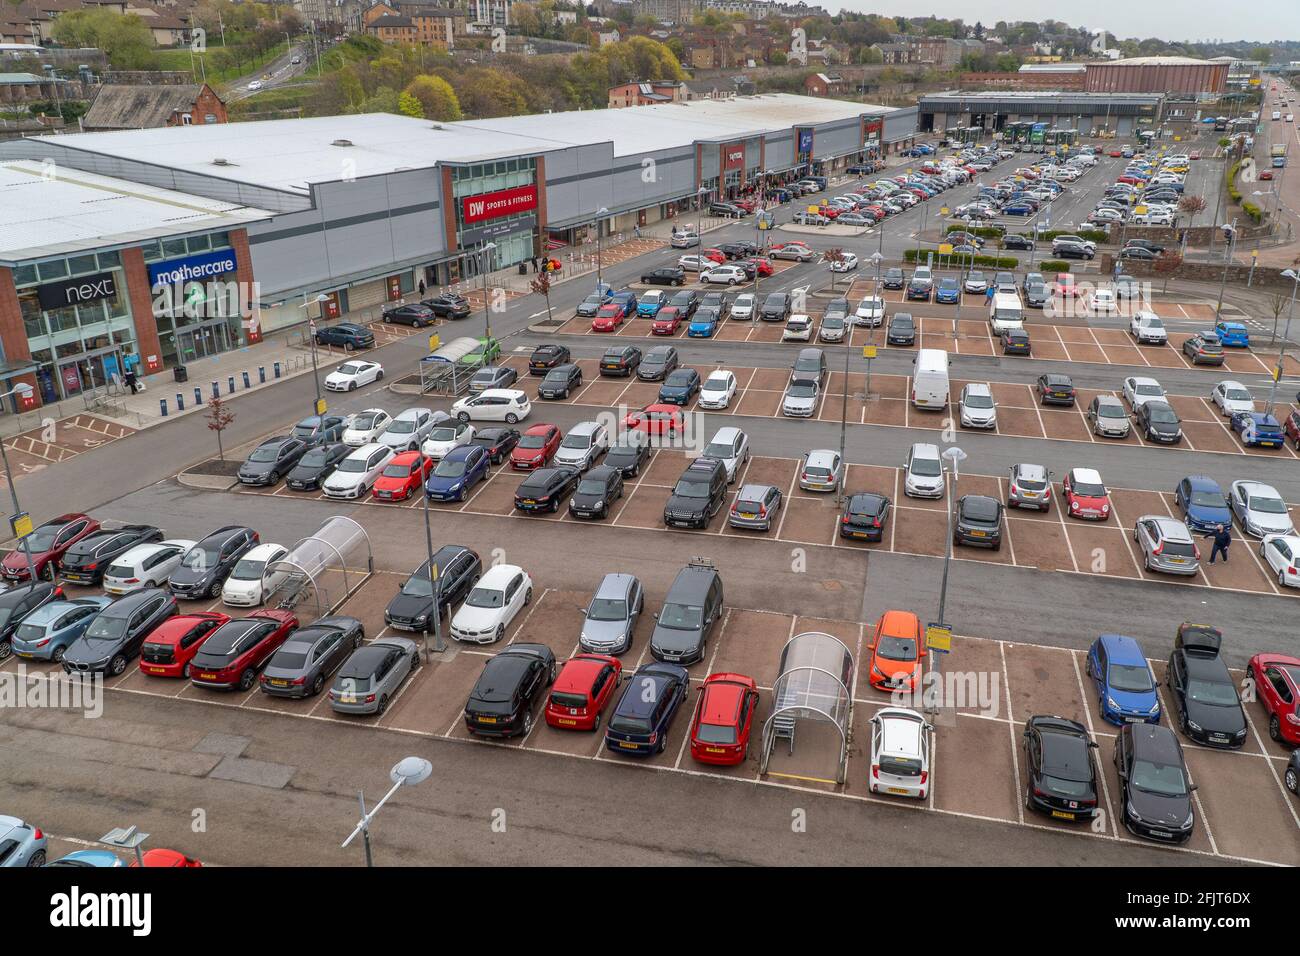 Dundee, Tayside, Scotland, 26.04.21: Gallagher Retail Park in Dundee, as  the car park reaches its max capacity, as Scotland leaves its second  lockdown and restrictions are relaxed on the public, and the